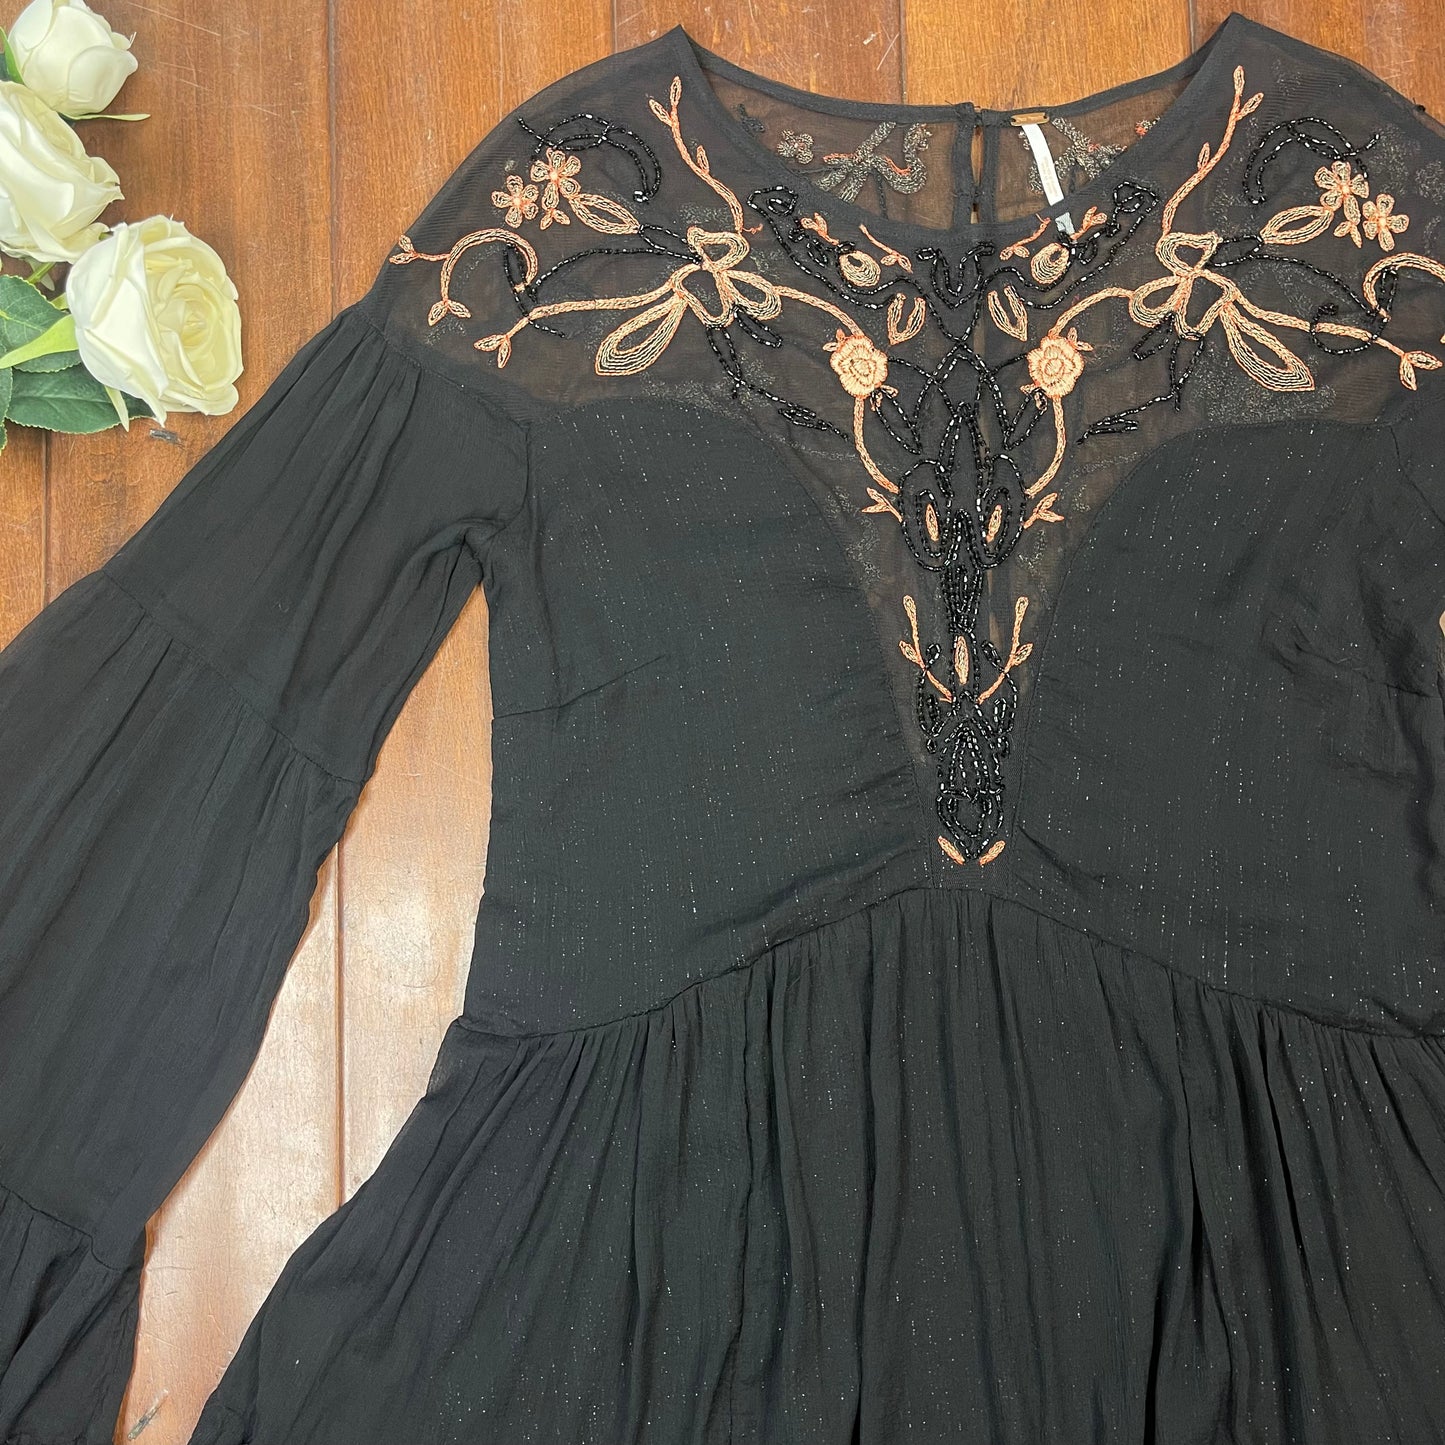 THRIFTED FREE PEOPLE GLITTER SHEER EMBROIDERED DRESS